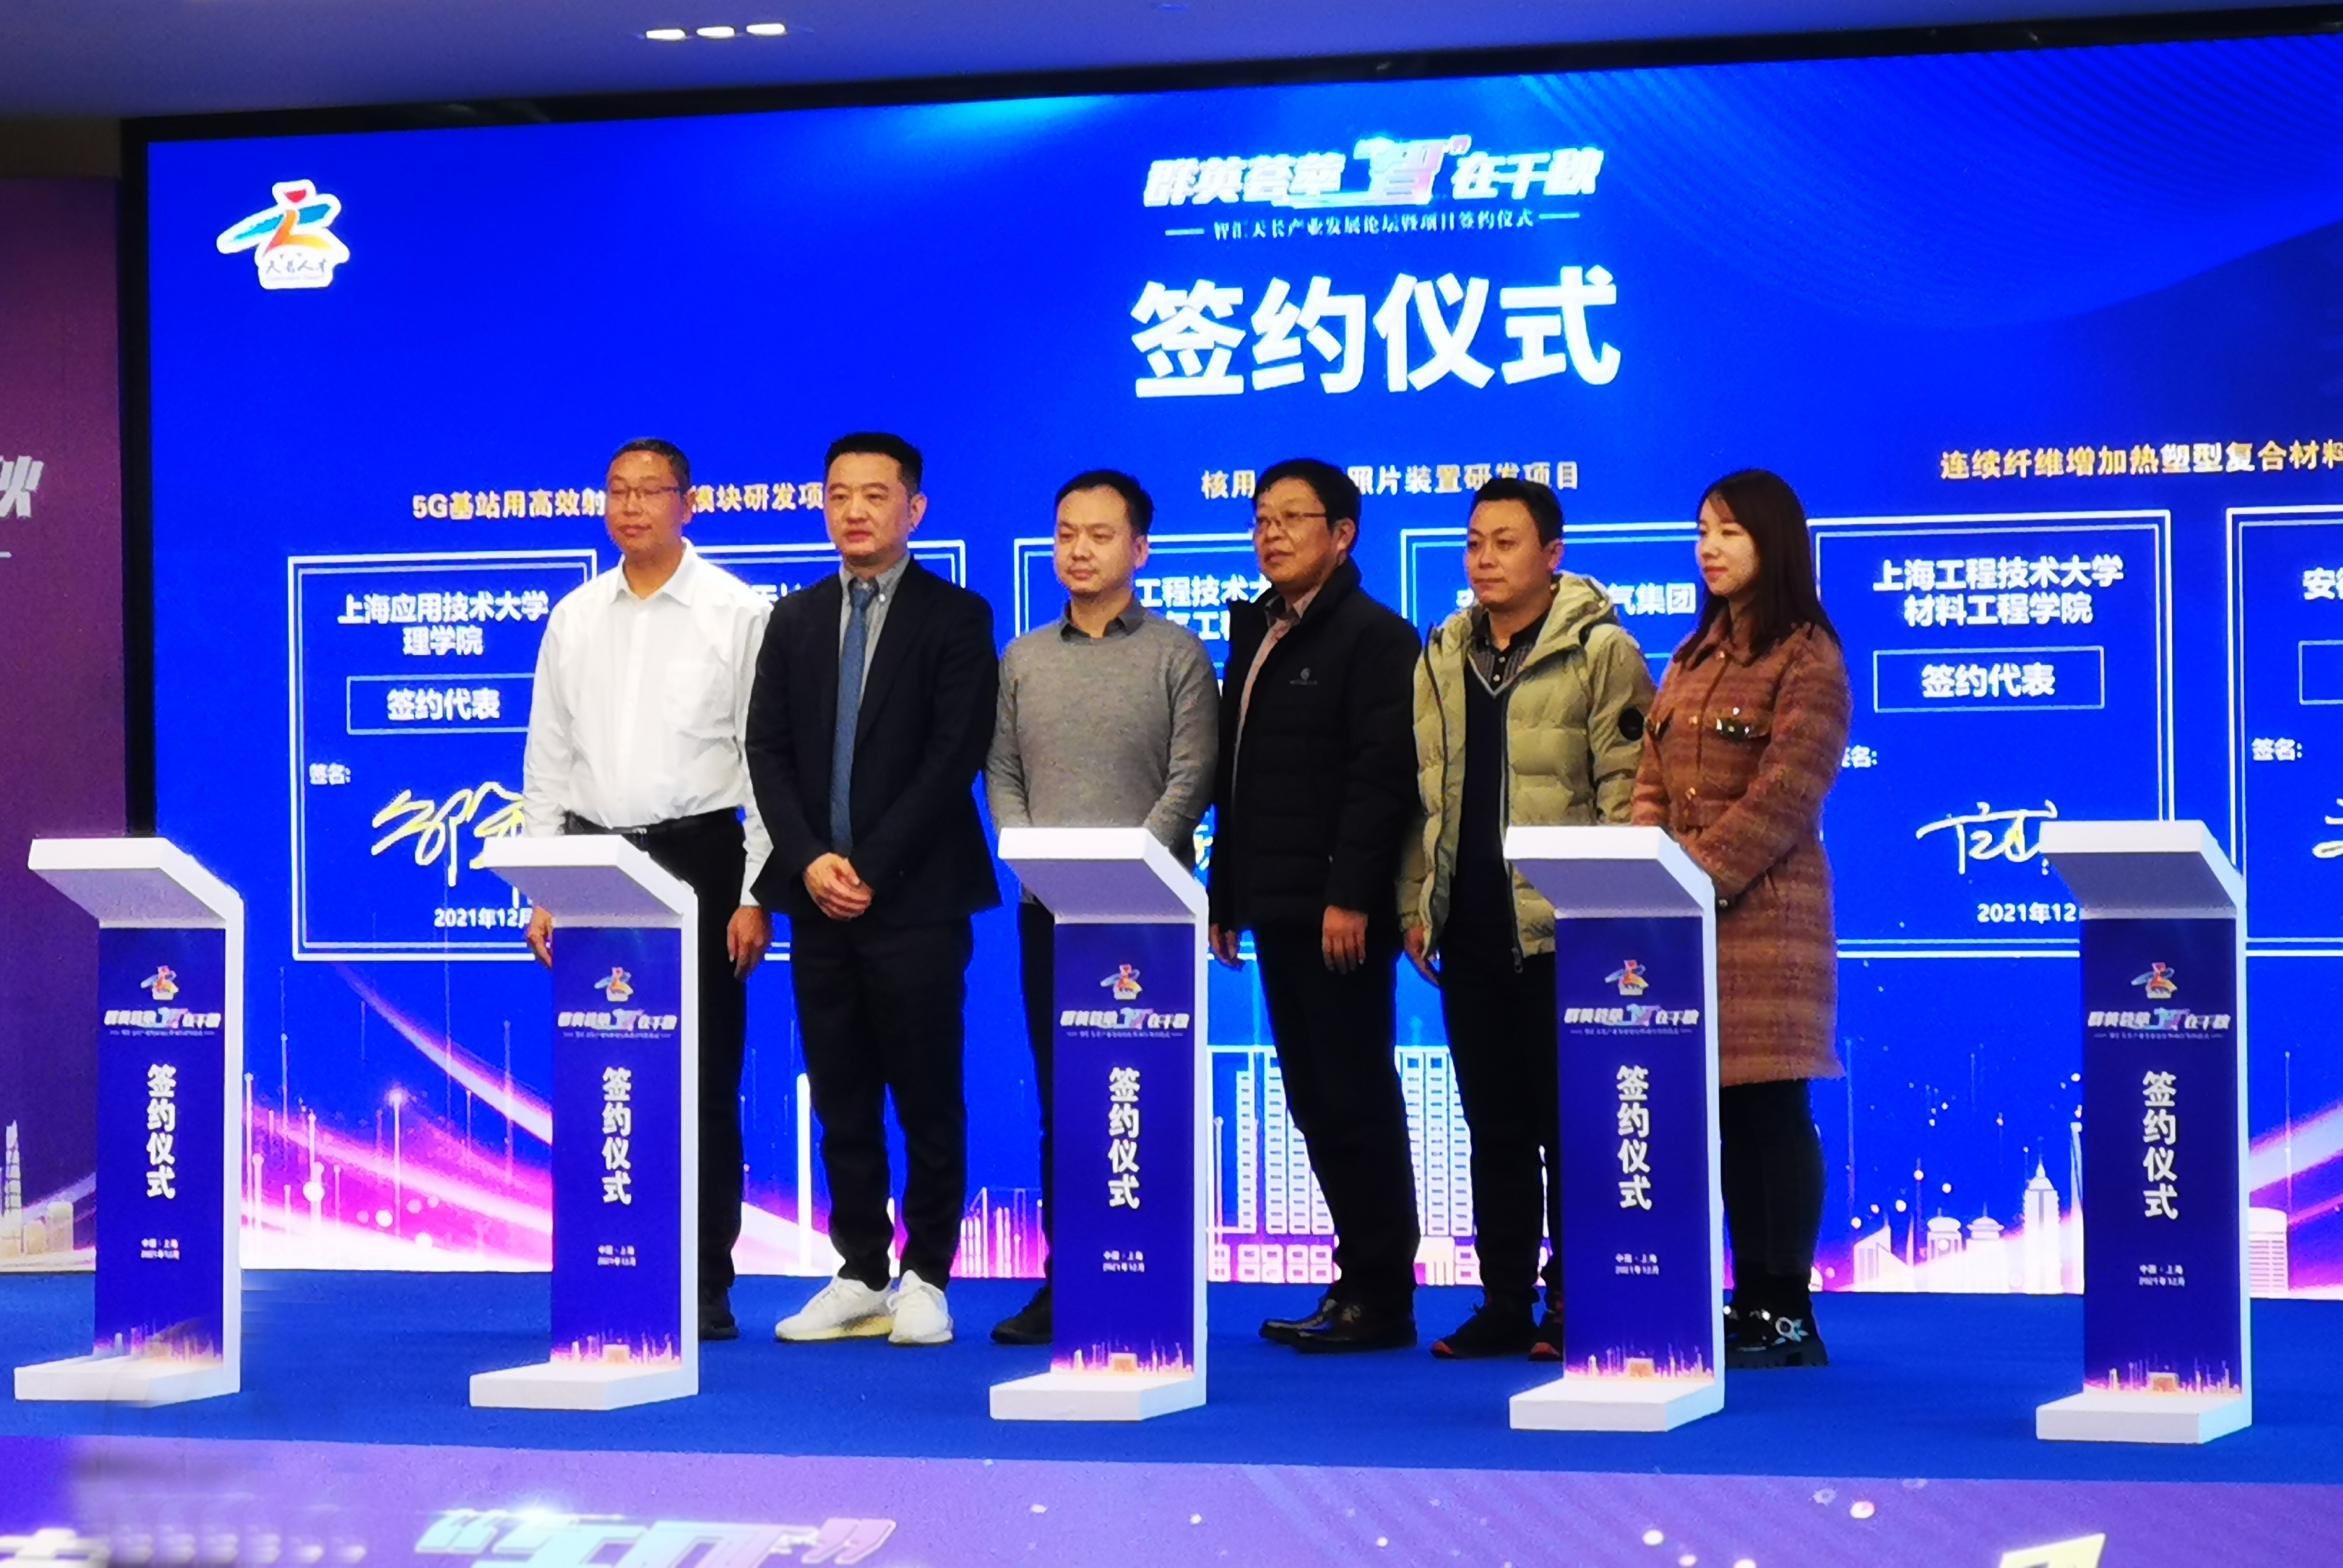 Fuan participate the Smart Tianchang Industry Development Forum and Project Signing Ceremony